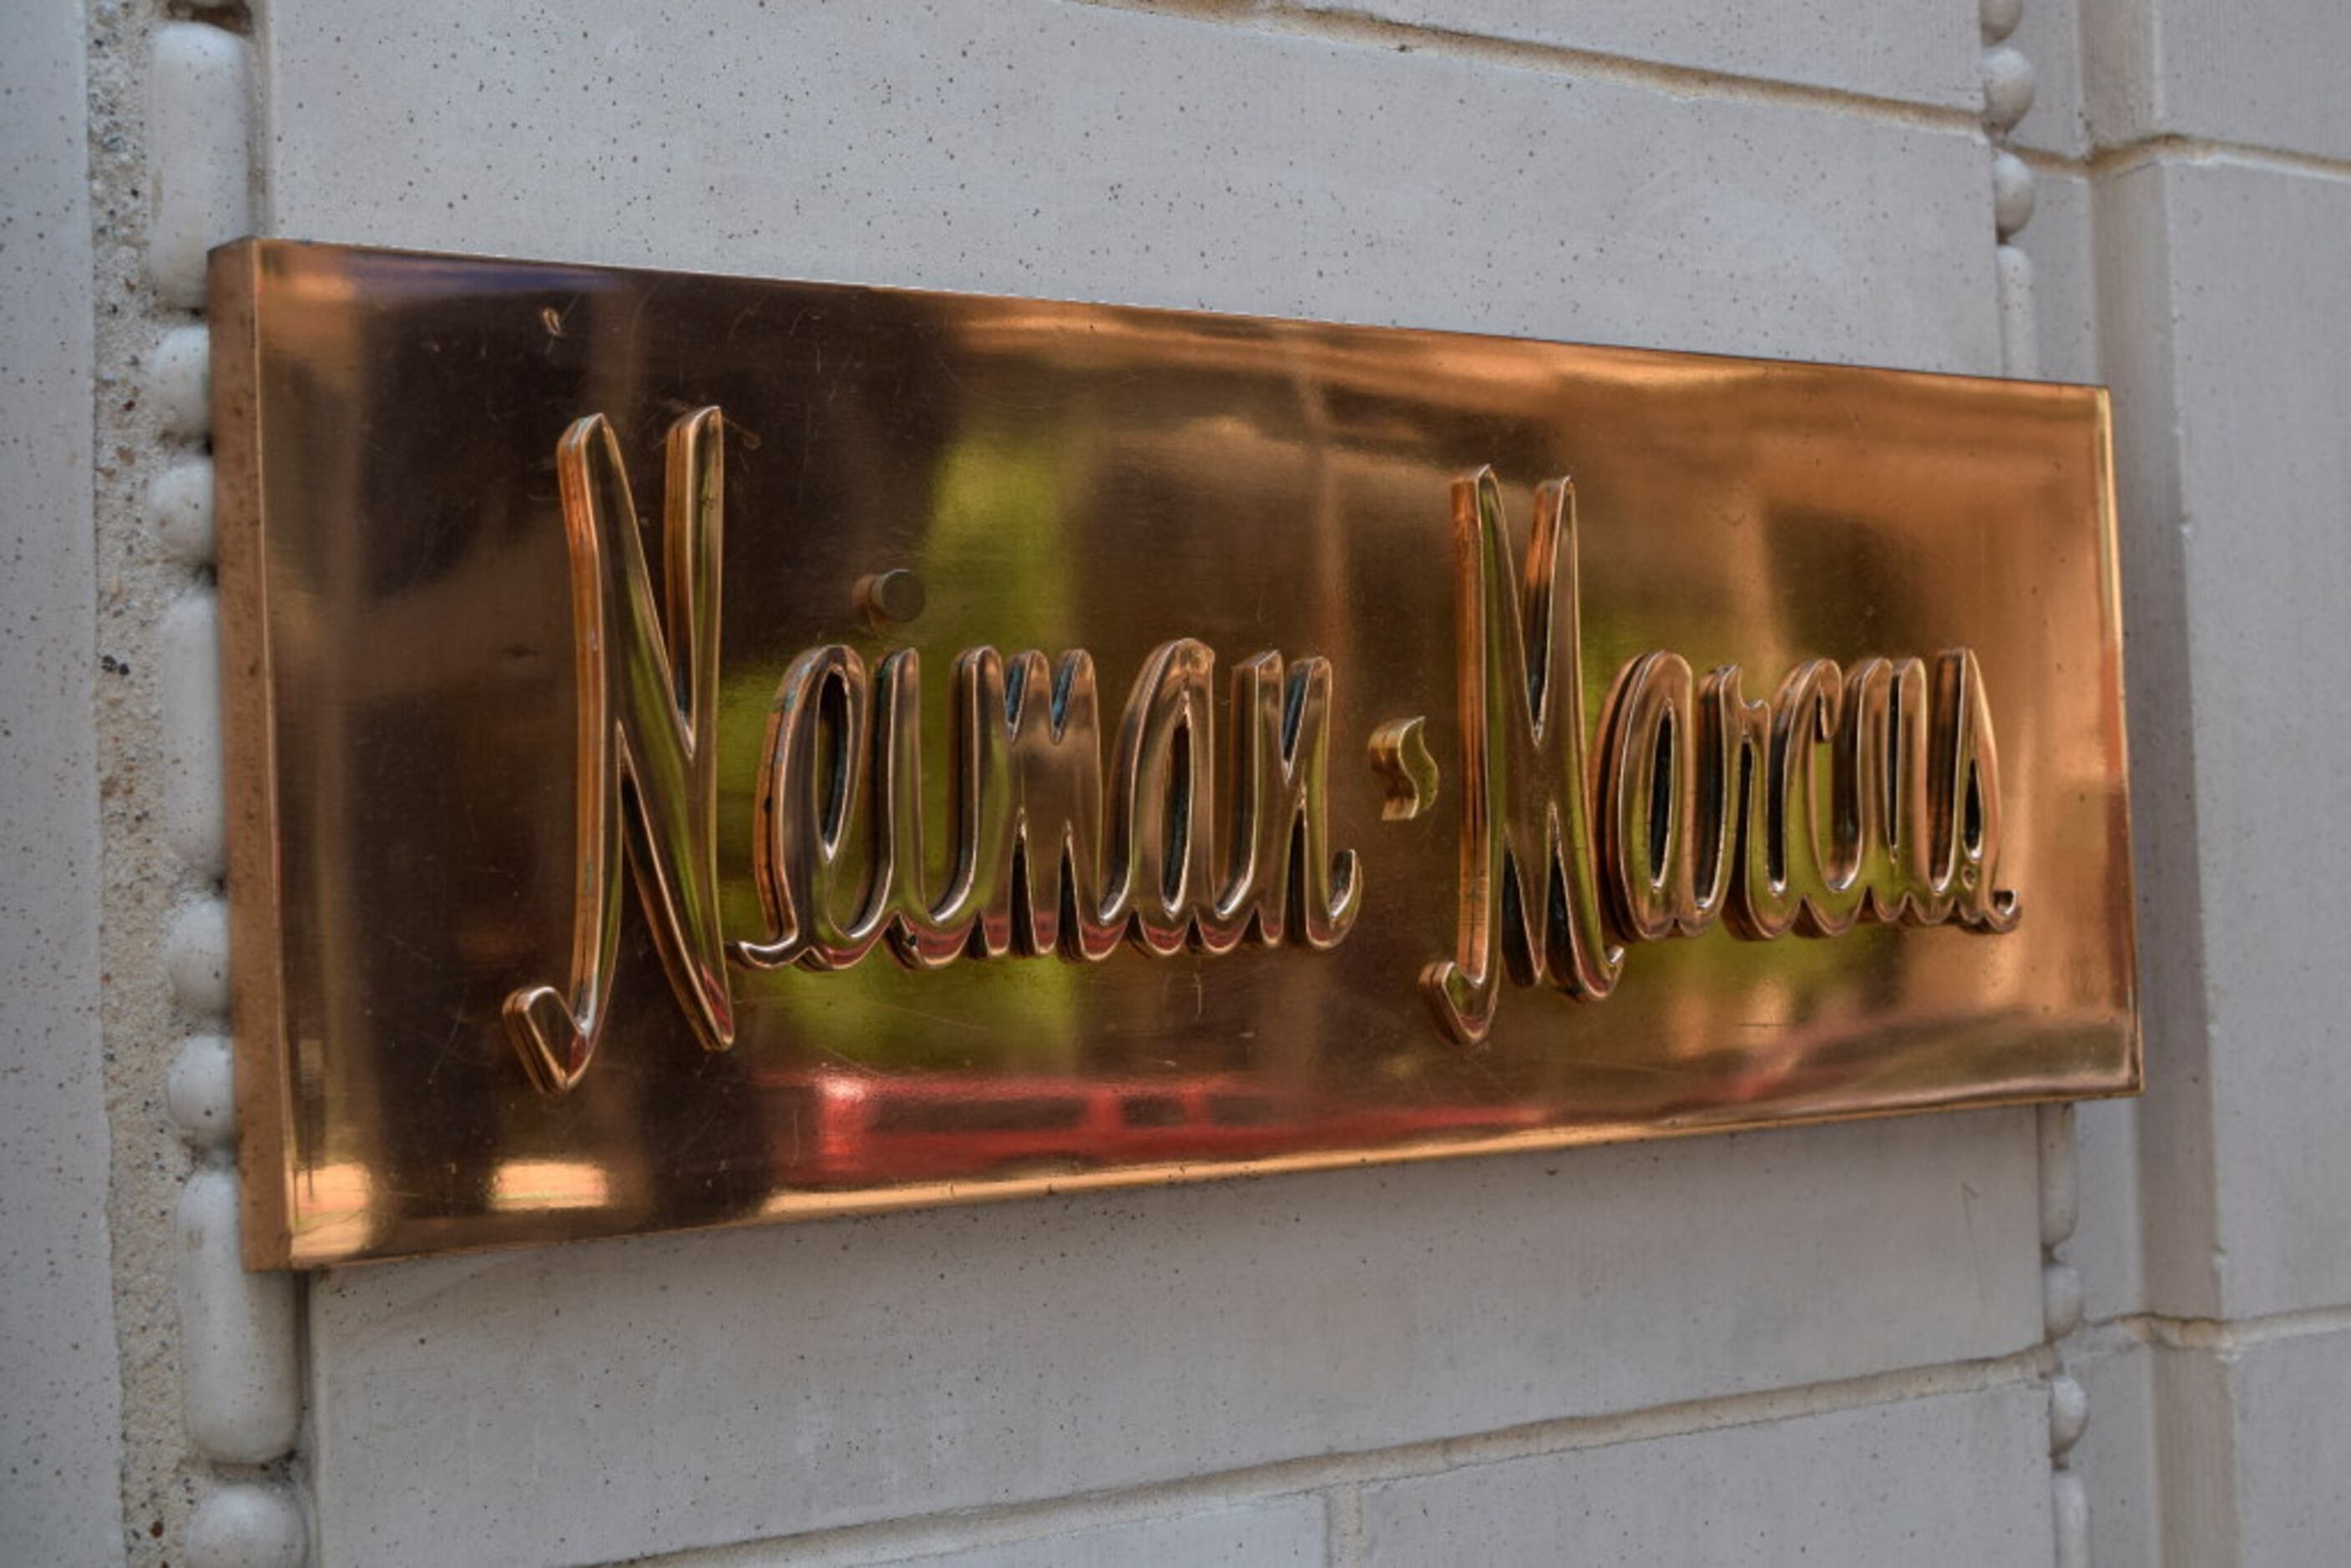 Neiman Marcus Could Get Millions in Incentives for Dallas HQ – NBC 5 Dallas-Fort  Worth